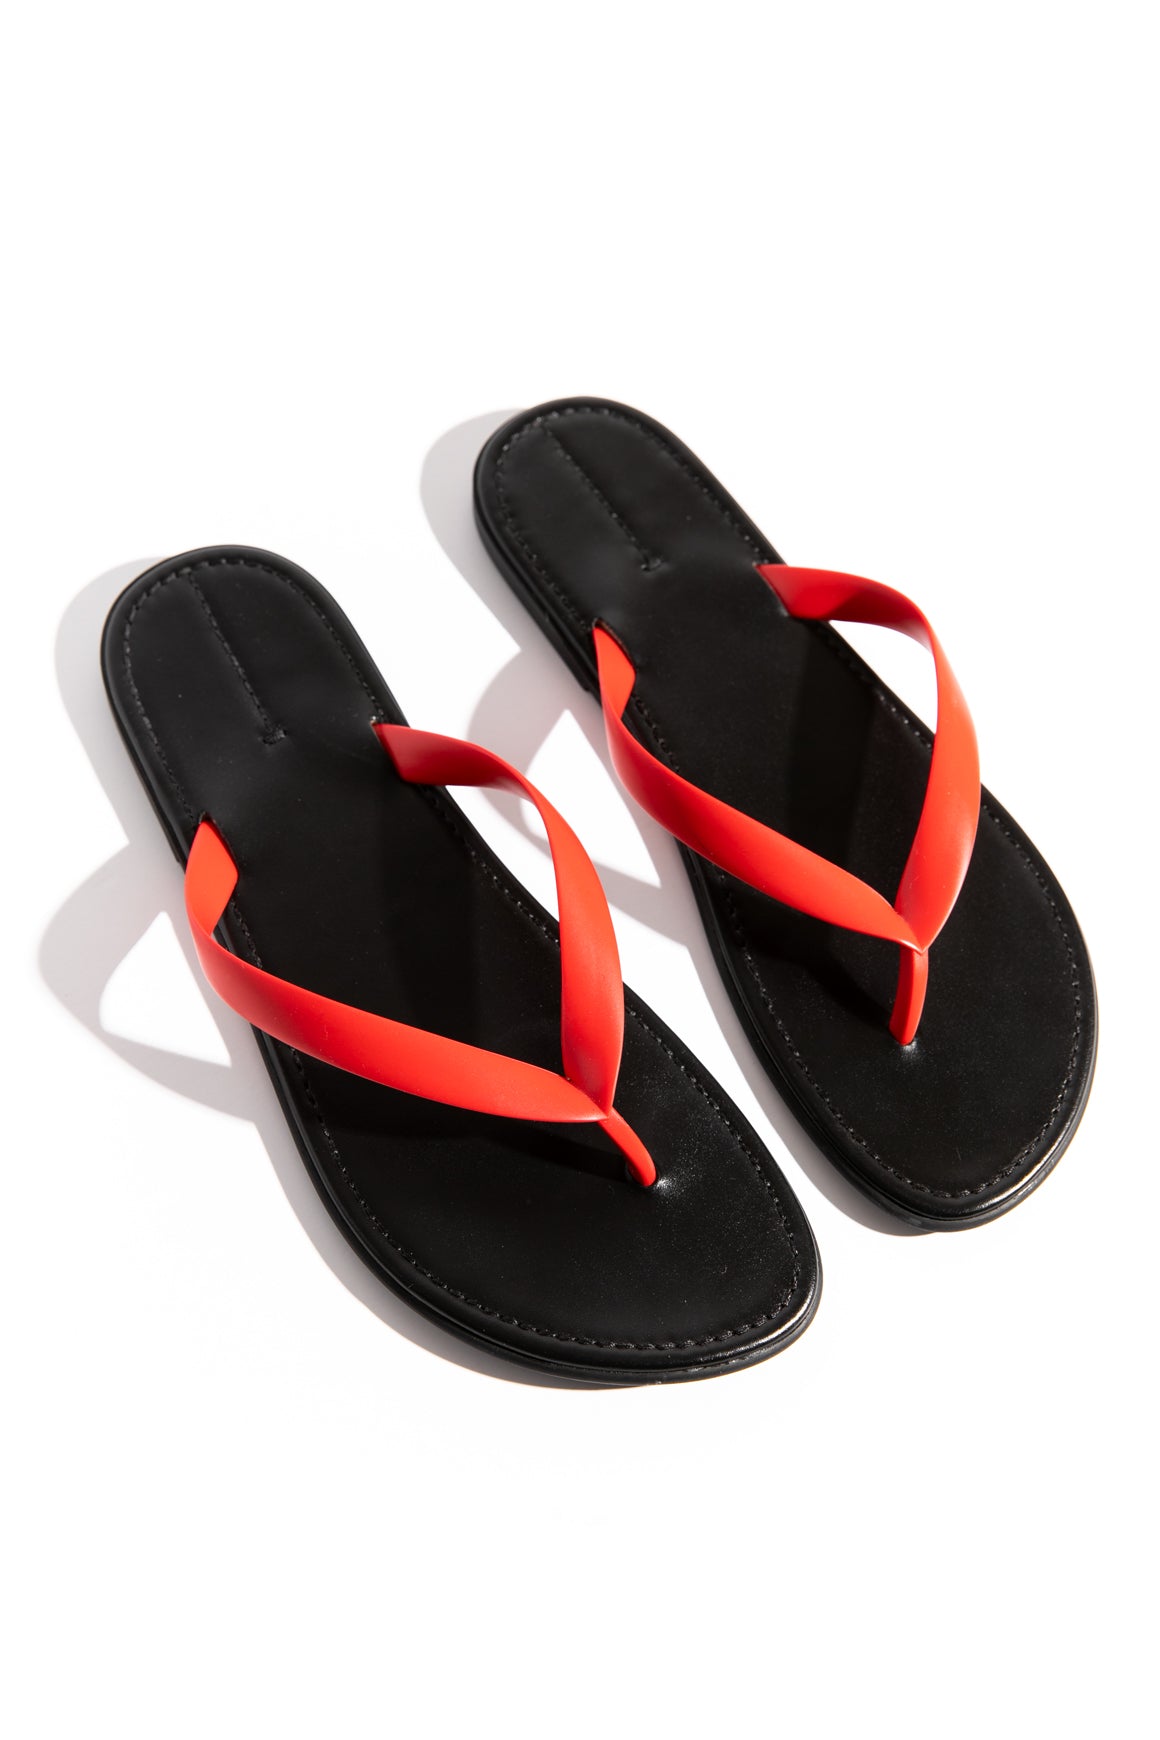 THE ROW Black & Red Leather Flip-Flops (Sz. 38)